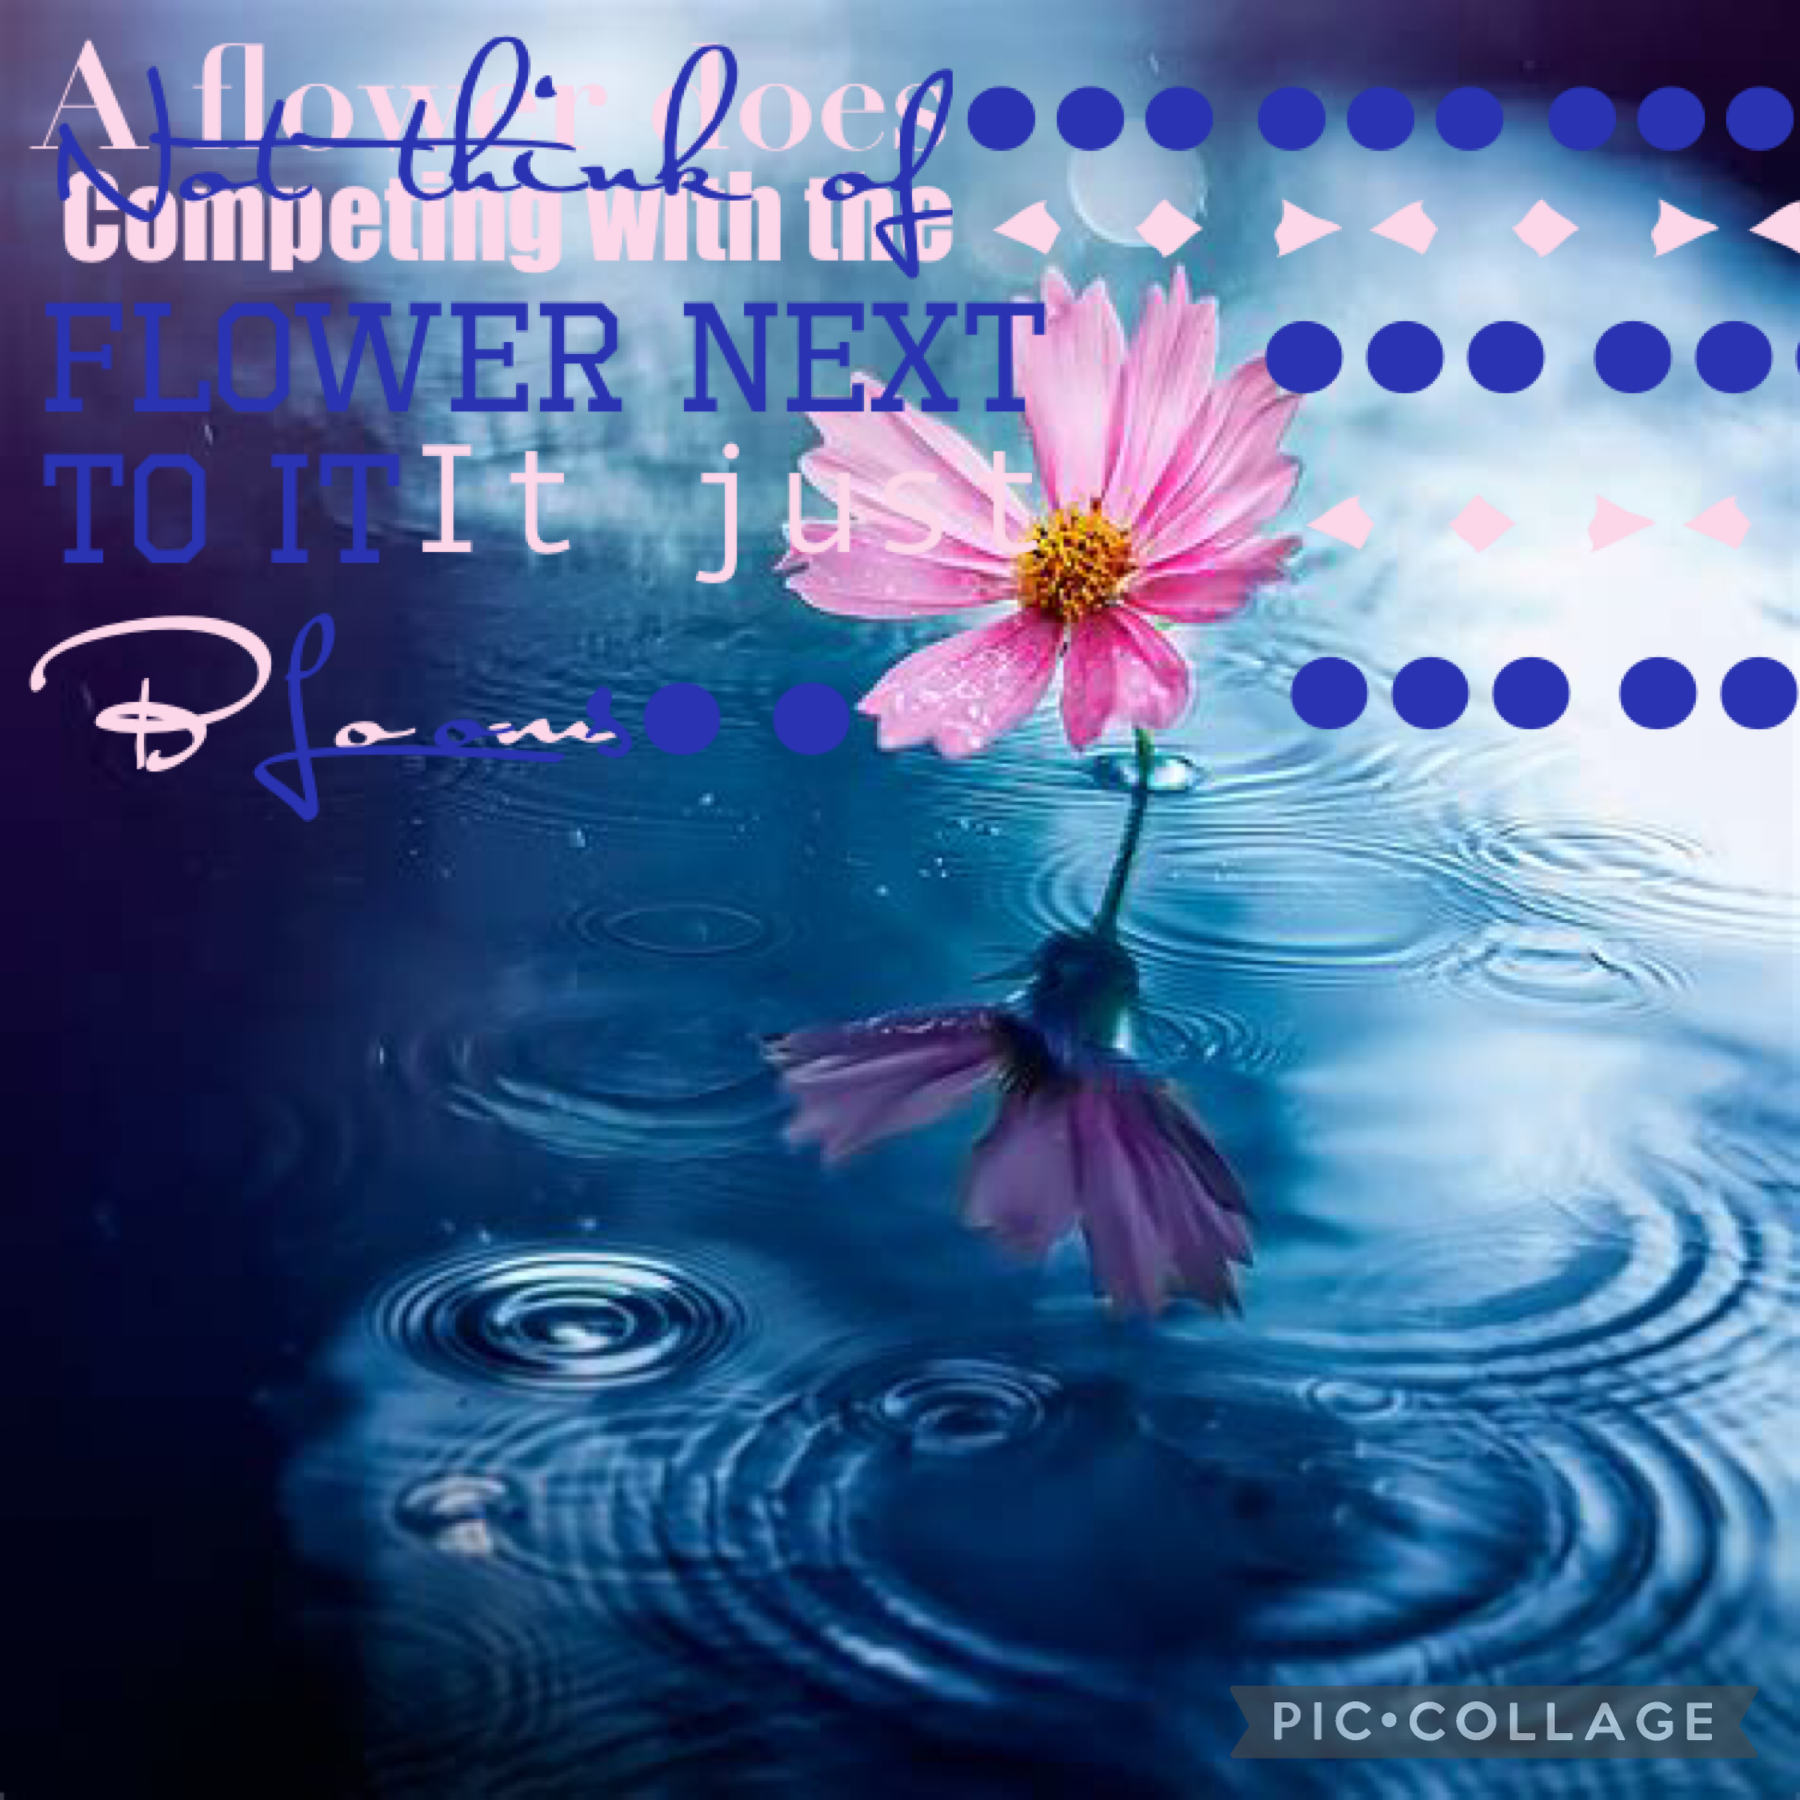 29.10.22 tap!!!
‘A flower does not think of competing with the flower next to it, it just blooms’
Love this quote!!!